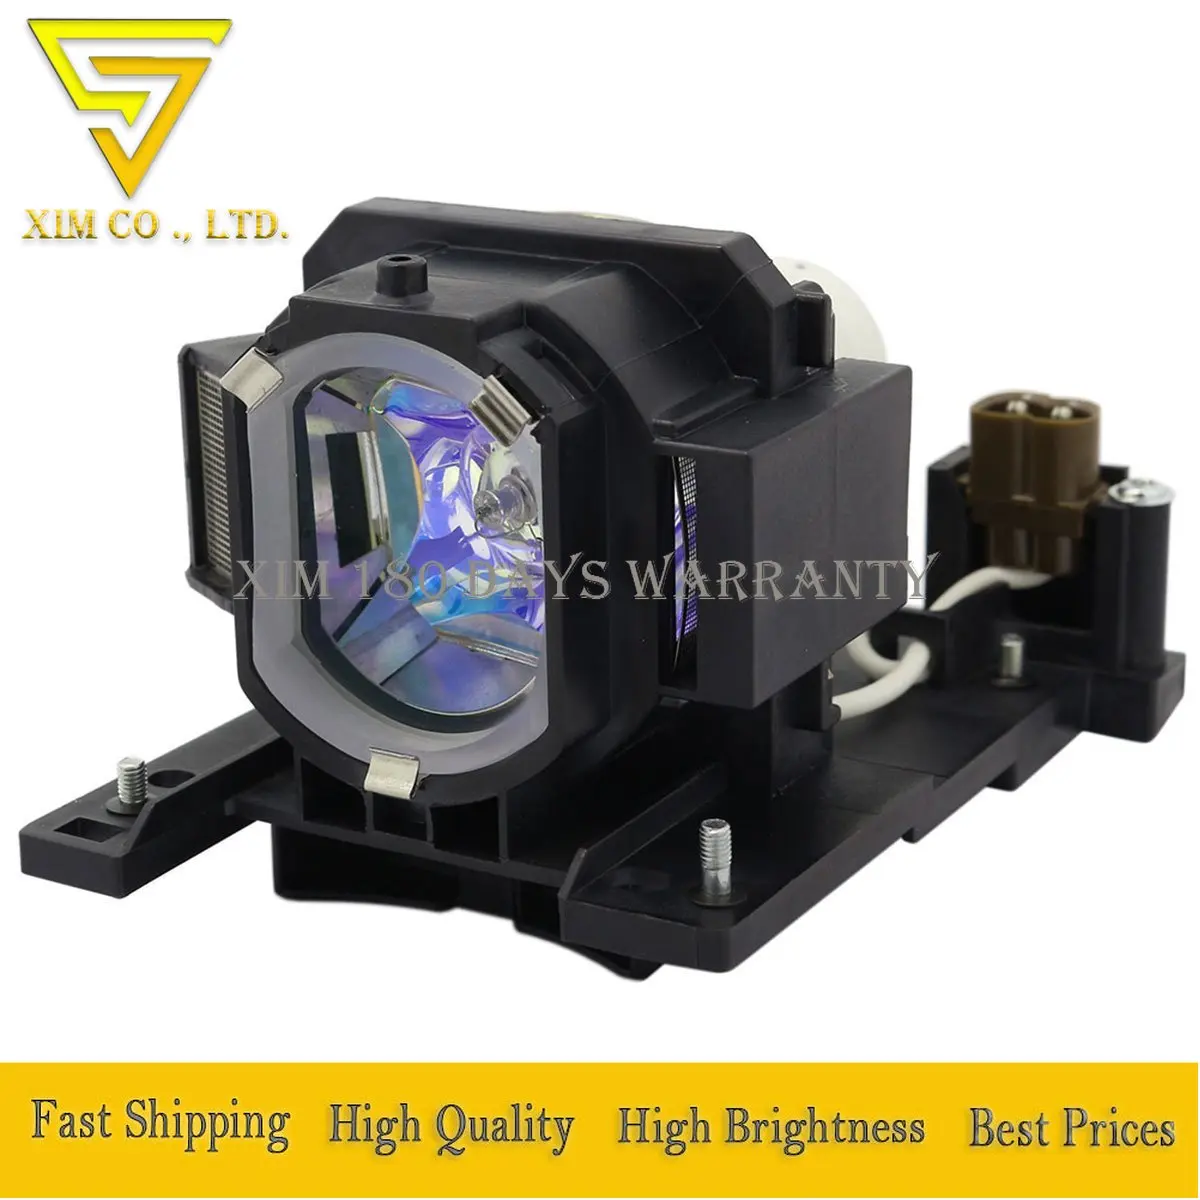 high quality DT01022 DT01026 Replacement Lamp with Housing for Hitachi CP-RX80W CP-RX78 ED-X24 CP-RX78W CP-RX80 projectors dt01431 replacement bare lamp for cp x2530 cp x3030wn cp x2530wn hitachi projectors with 180 days after delivery